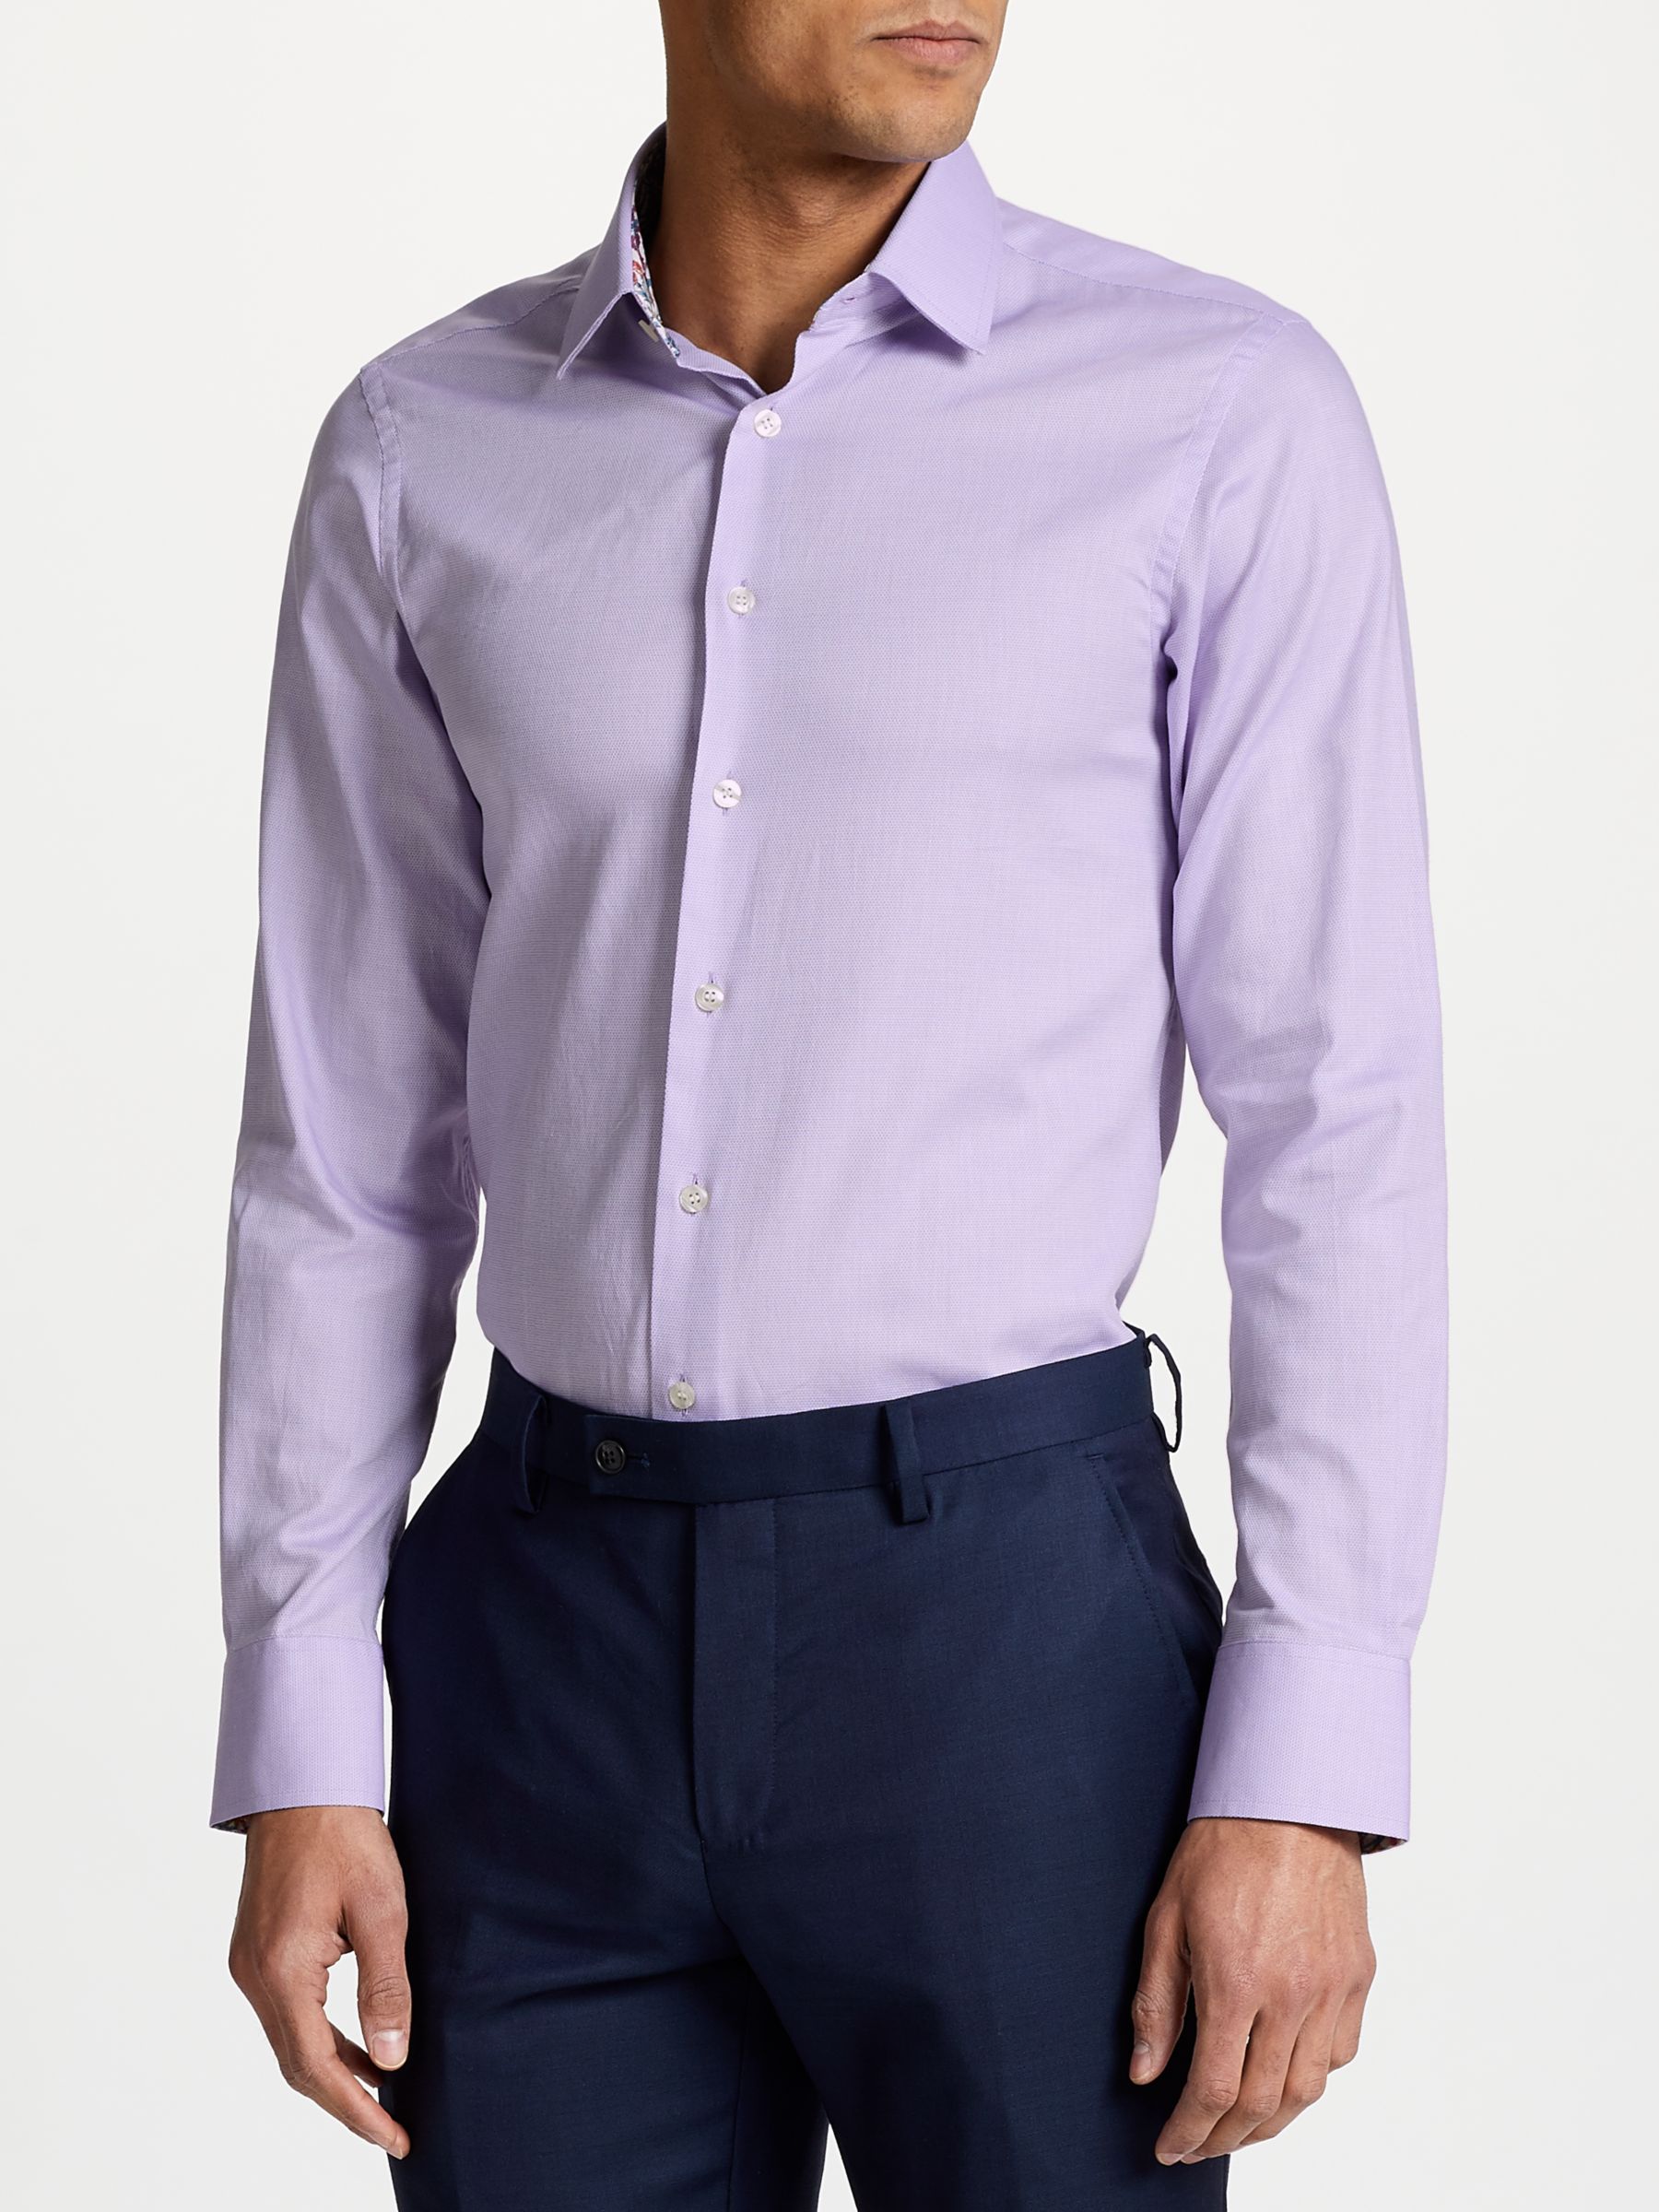 Smyth & Gibson Circle Weave 100s Cotton Slim Fit Shirt, Lilac, 16